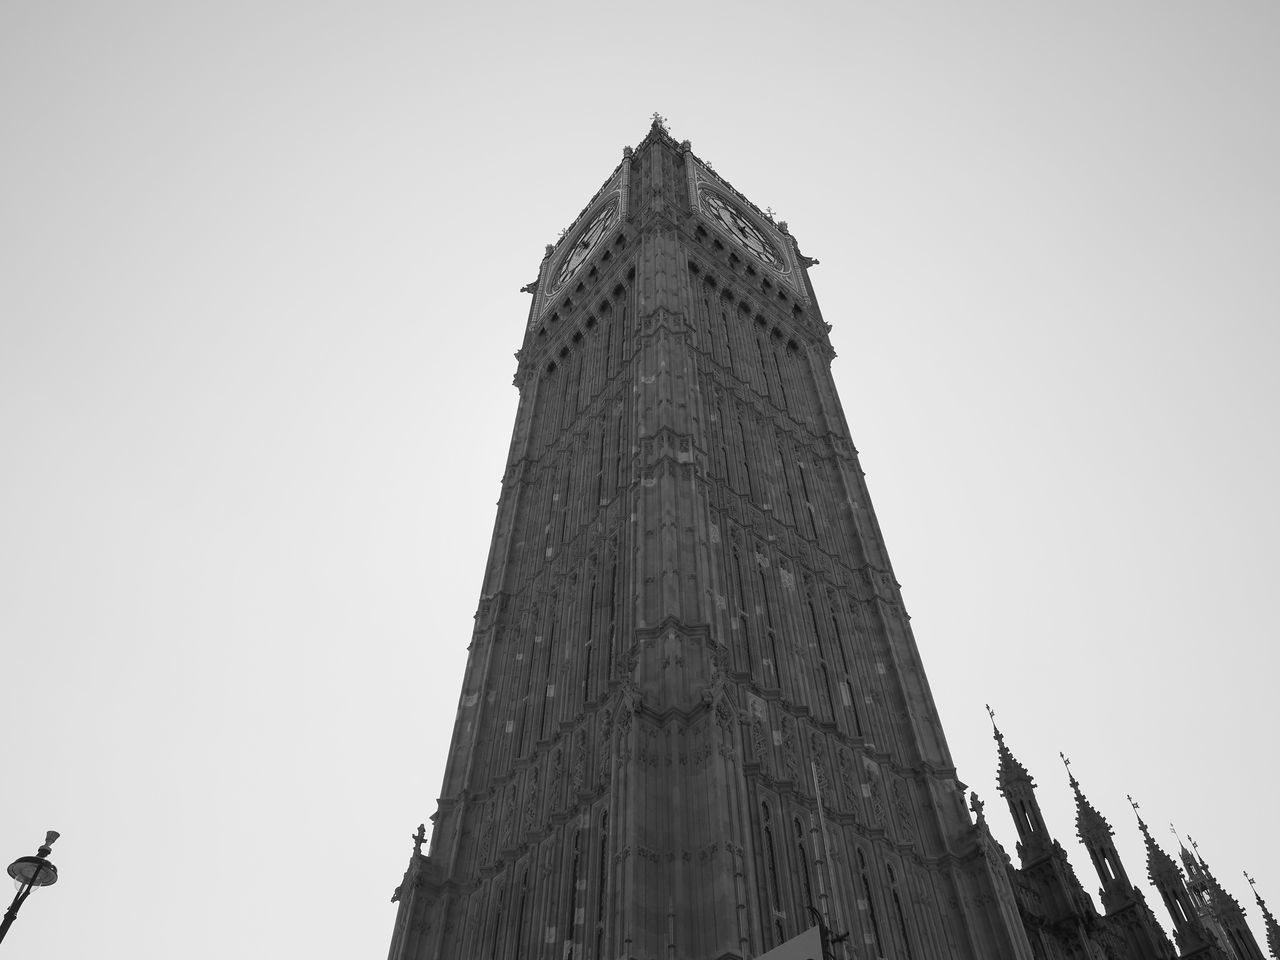 architecture, built structure, spire, building exterior, low angle view, sky, tower, steeple, history, travel destinations, the past, landmark, nature, building, black and white, travel, no people, monument, clear sky, city, day, outdoors, monochrome, skyscraper, tourism, monochrome photography